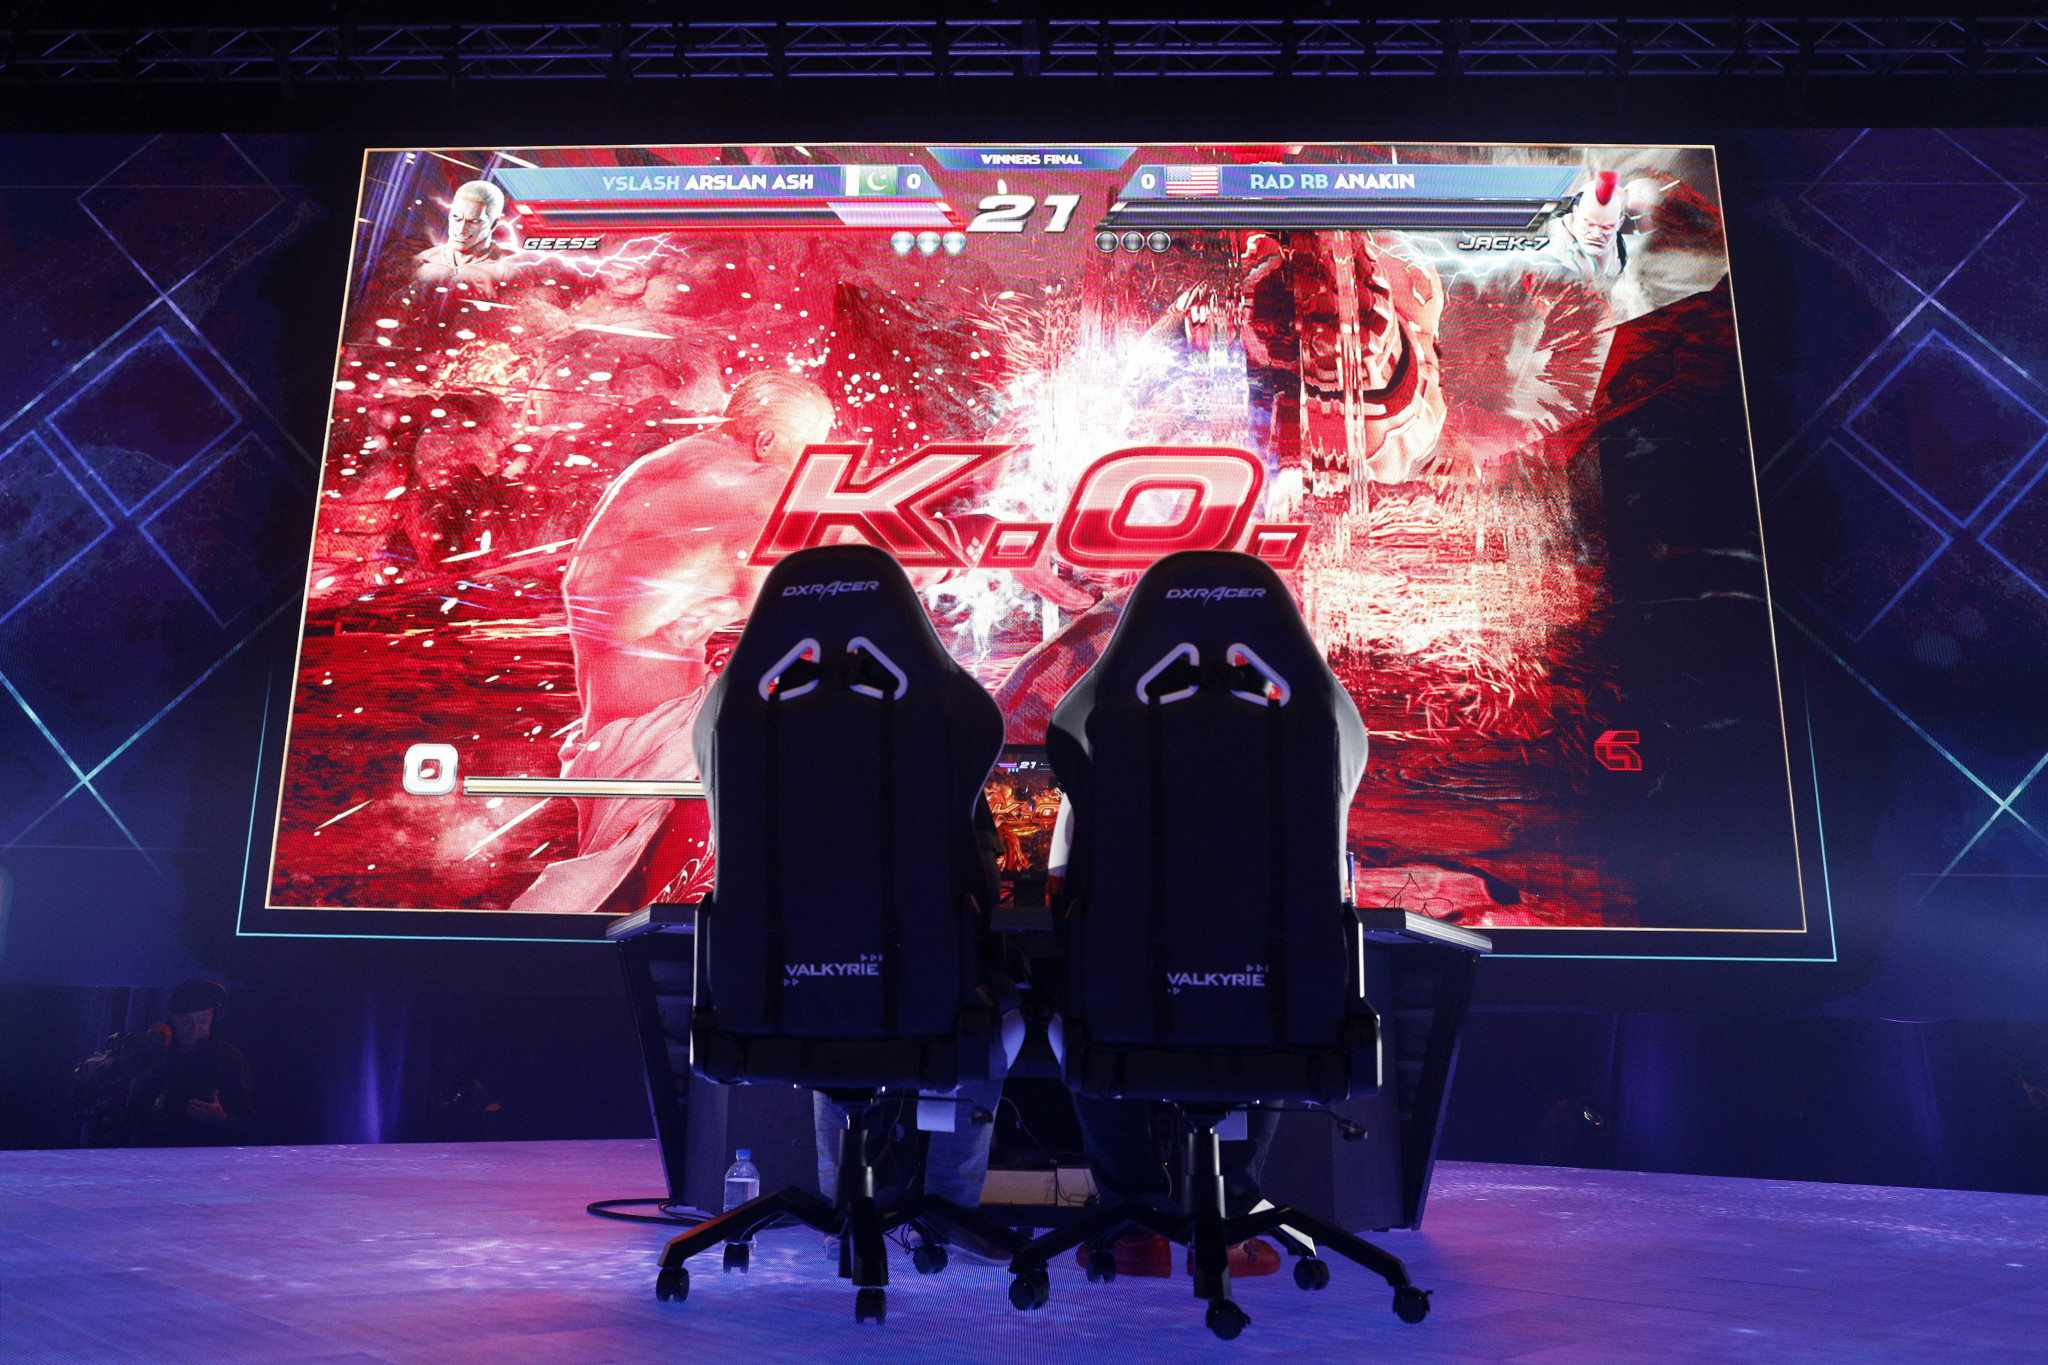 Tekken 7 is one of the titles which has been selected for this year's IeSF World Championship in Eilat in November ©Getty Images